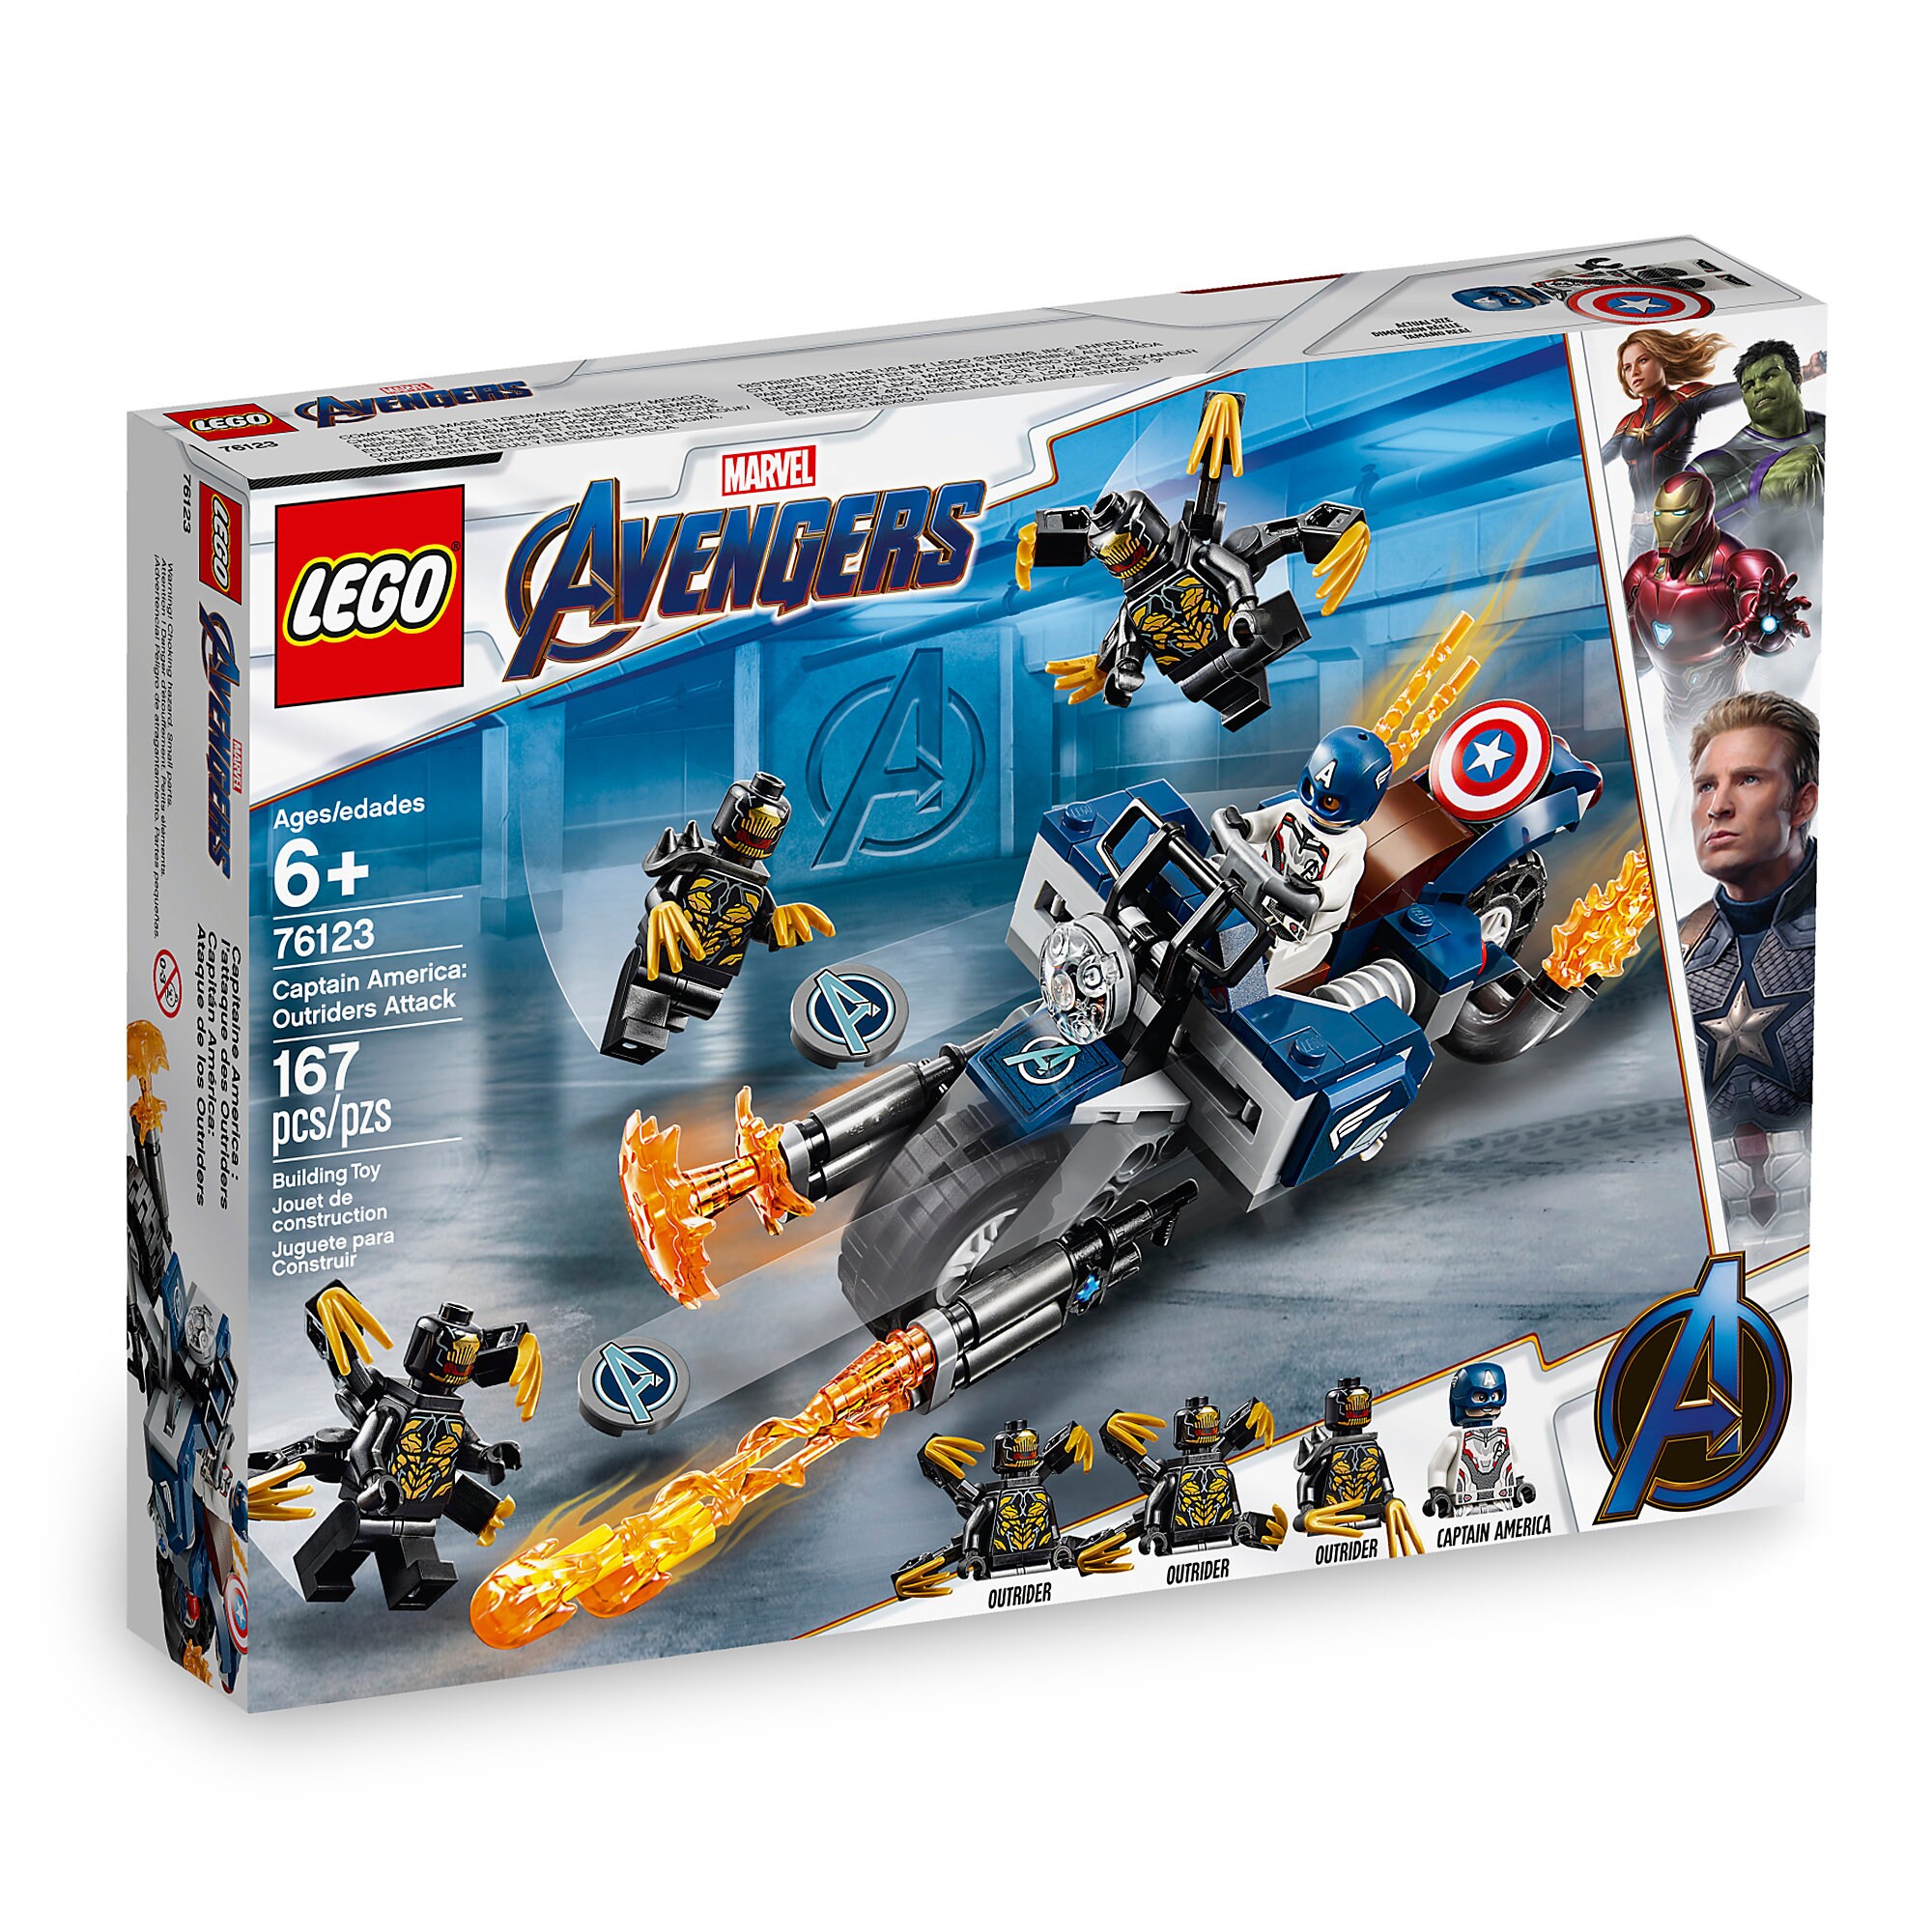 Captain America Outriders Attack Play Set by LEGO - Marvel's Avengers: Endgame